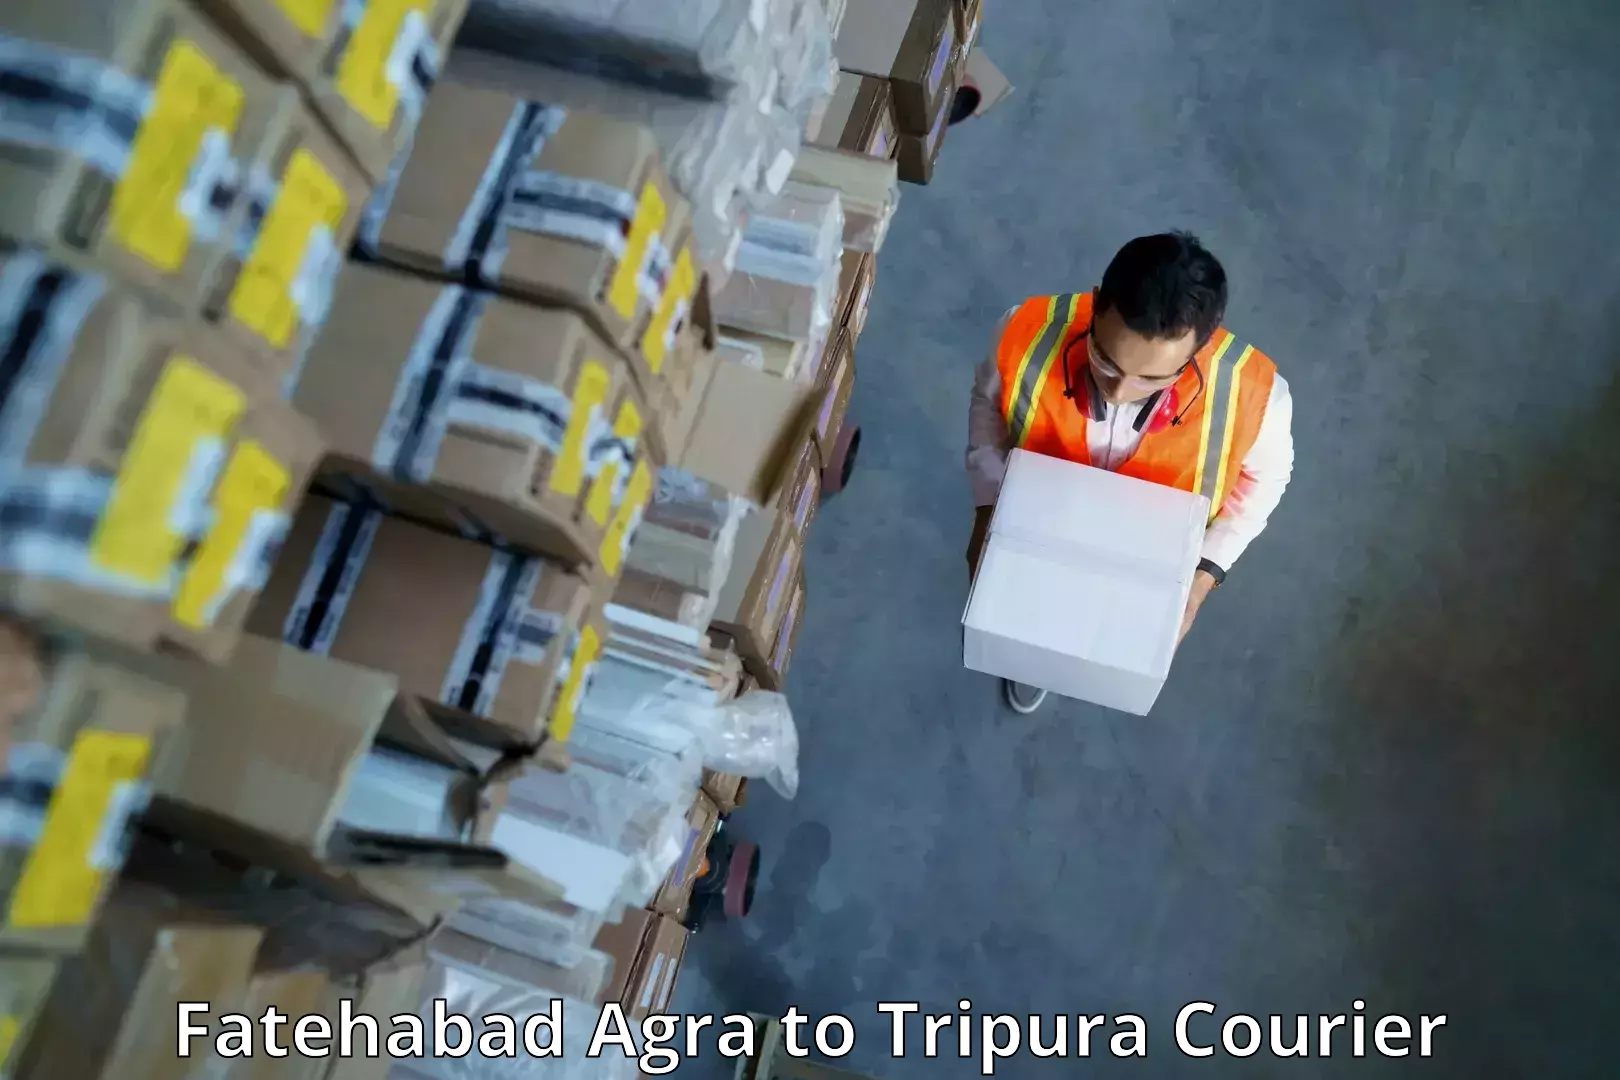 Reliable freight solutions Fatehabad Agra to Udaipur Tripura